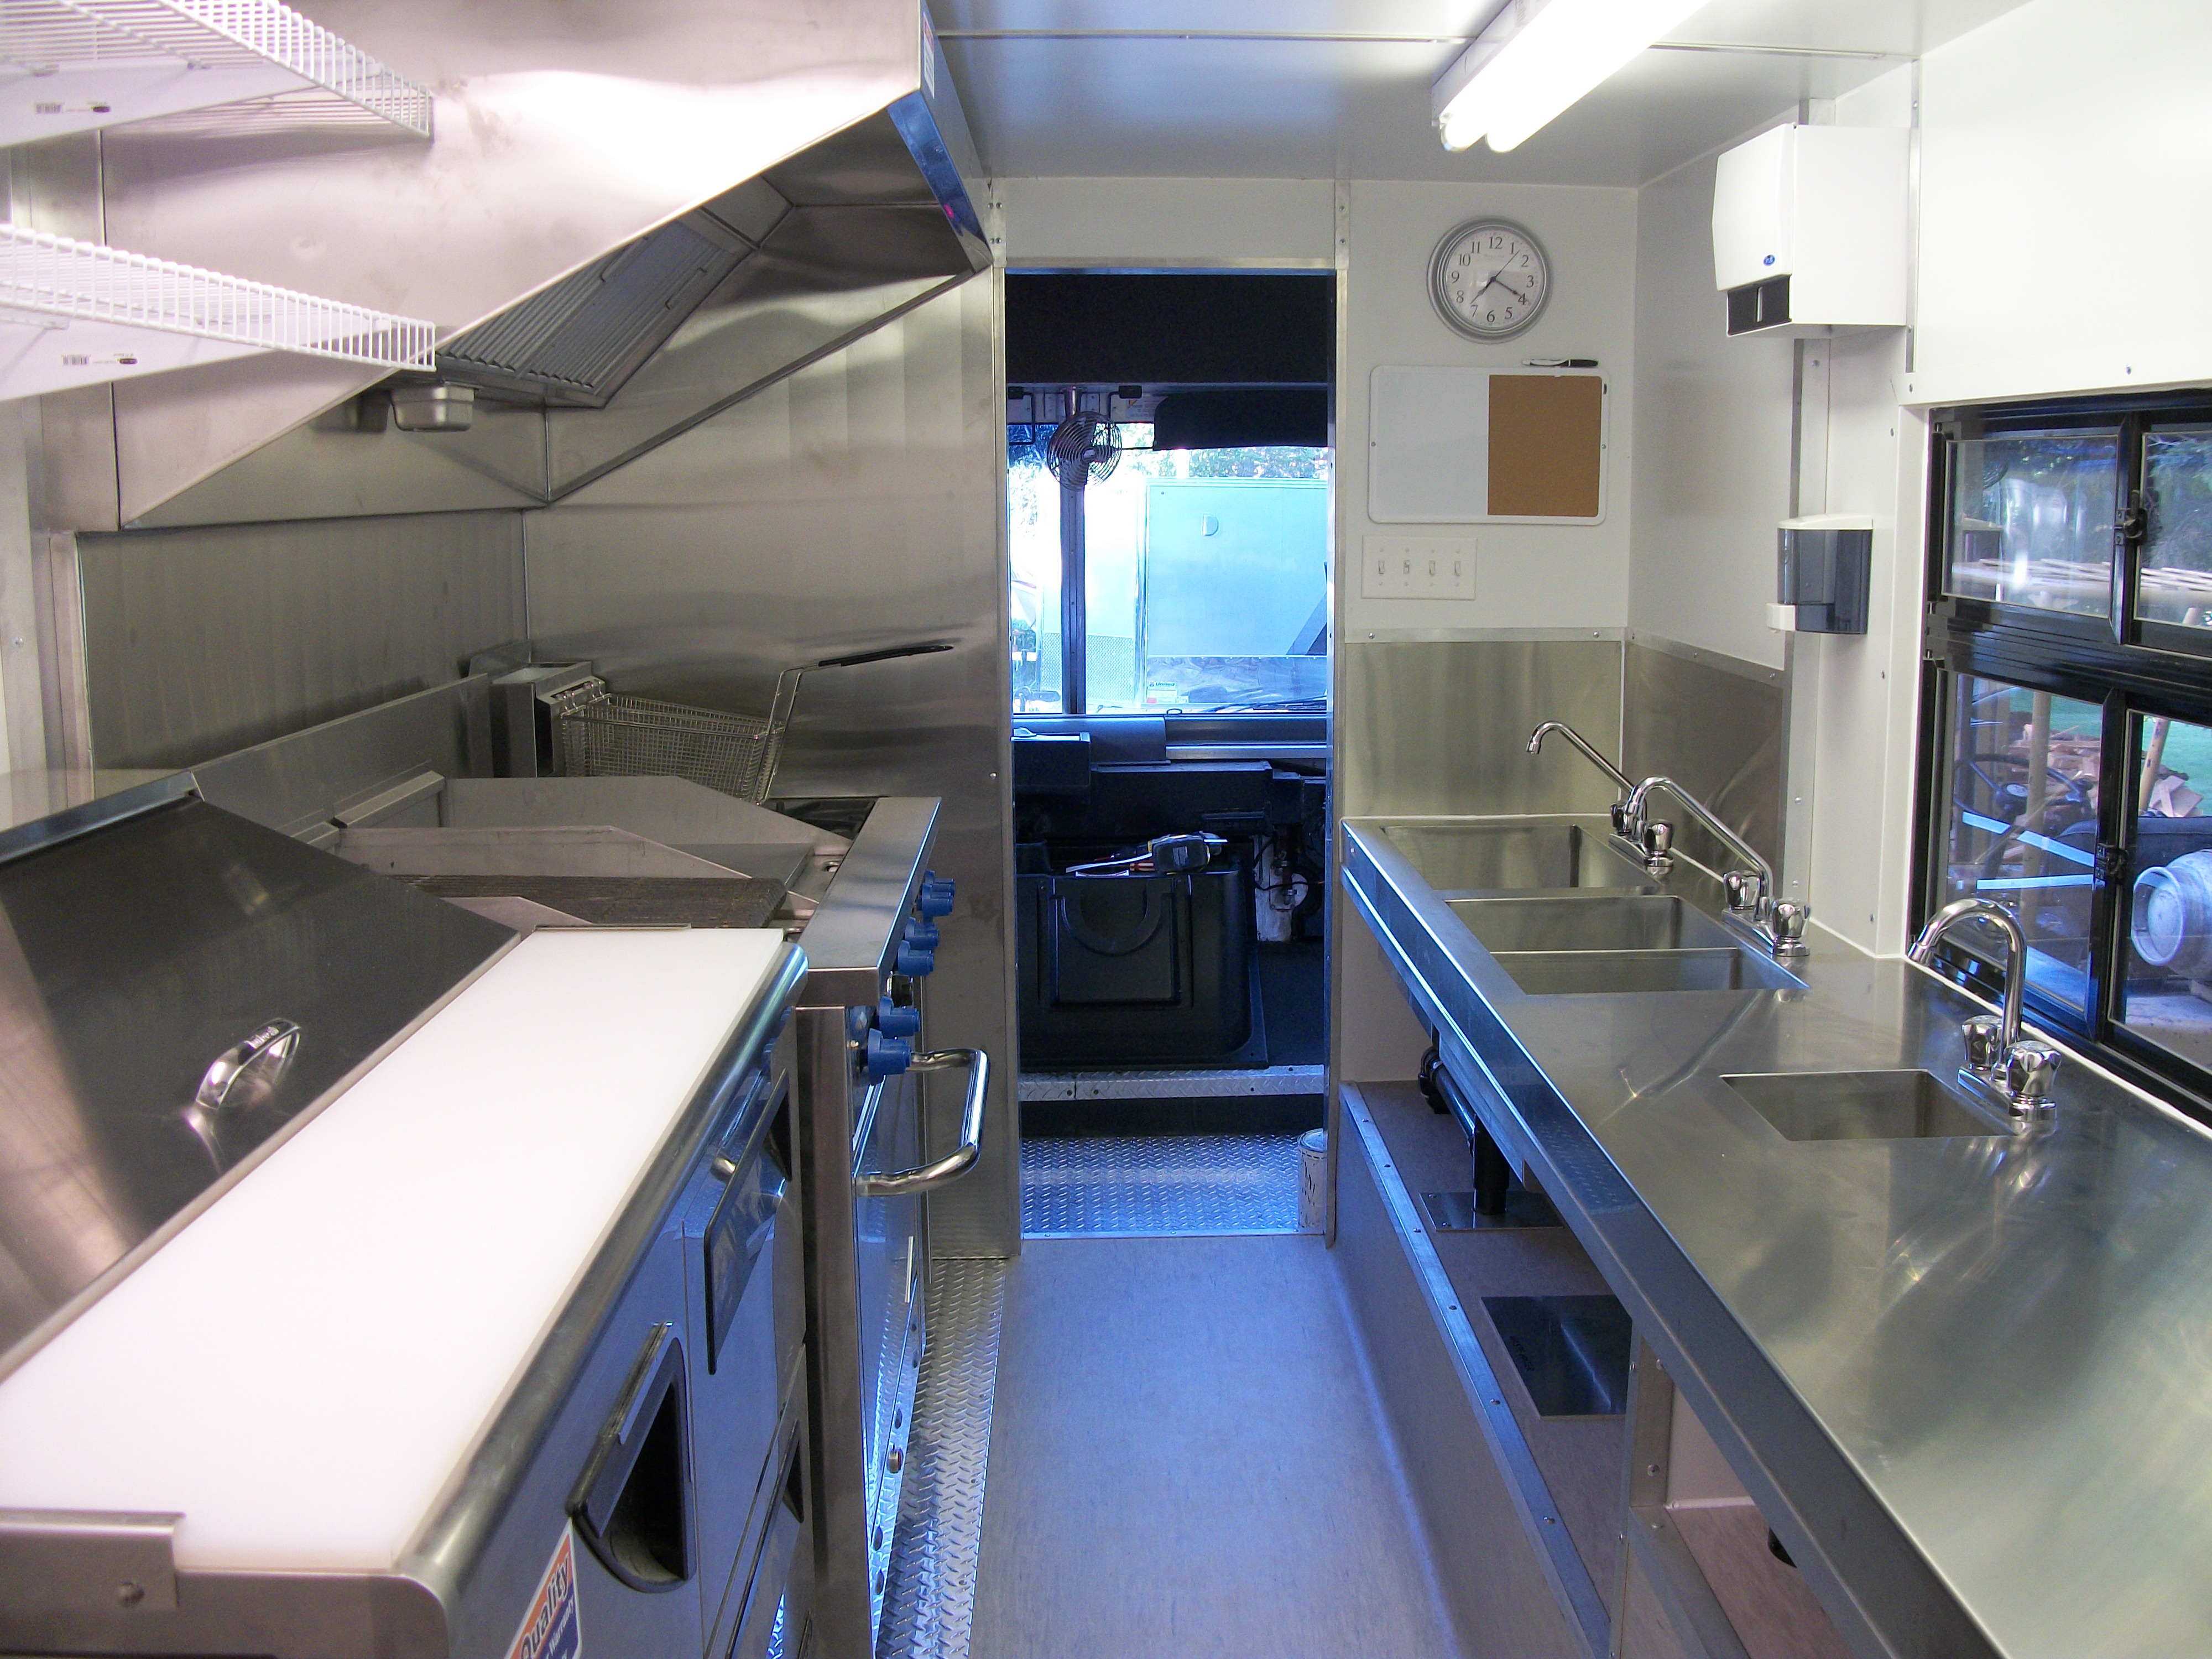 Concession Truck photo - kitchen rear view